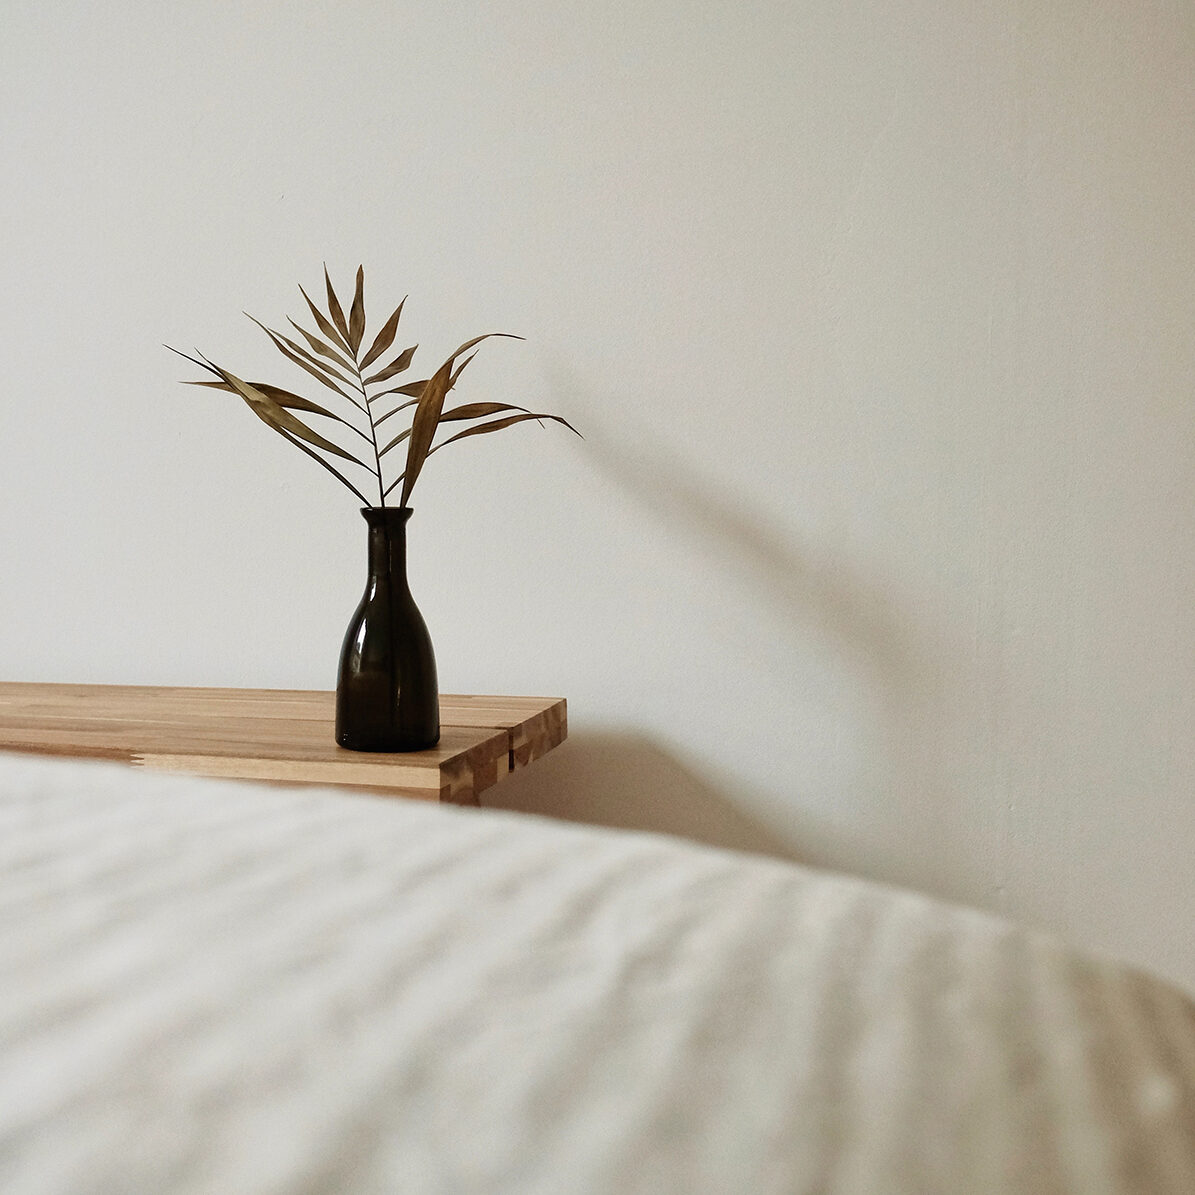 Greenery setting in a vase on a bedside table. Learn the skills to face and overcome childhood trauma with Therapy for Childhood Trauma Survivors in Ohio and start living your best life.